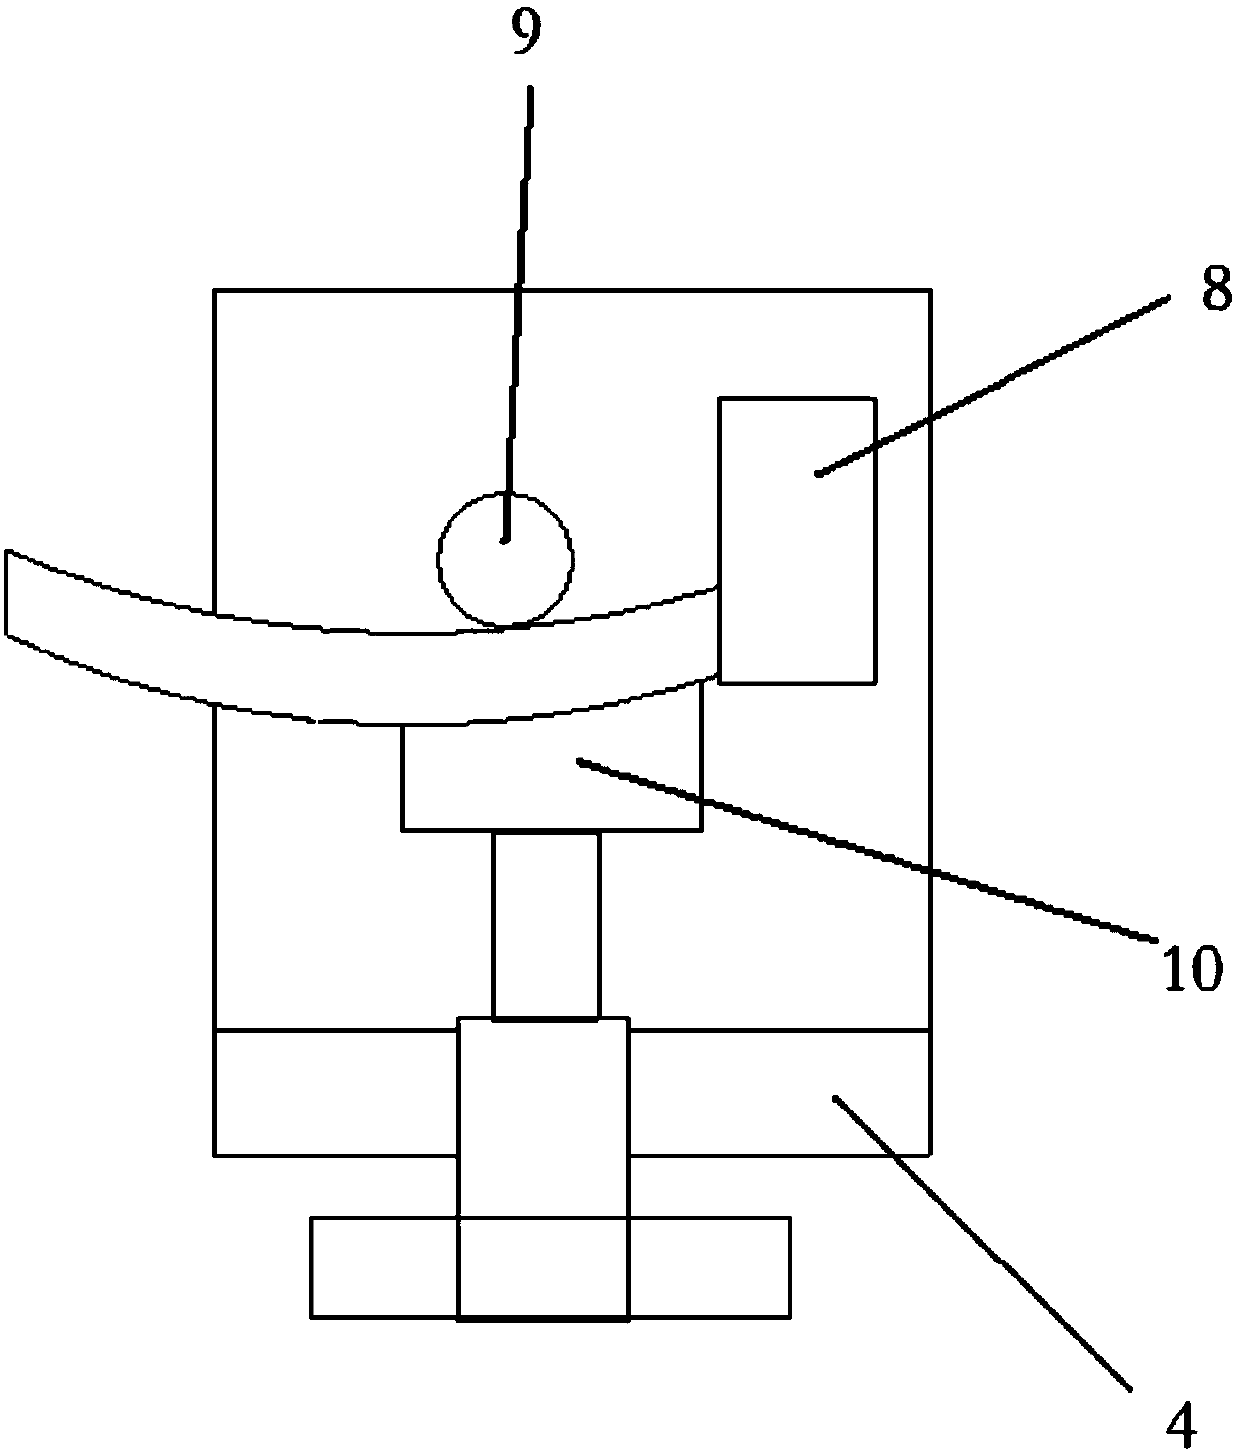 A method for assembling and welding fan-shaped block welding components